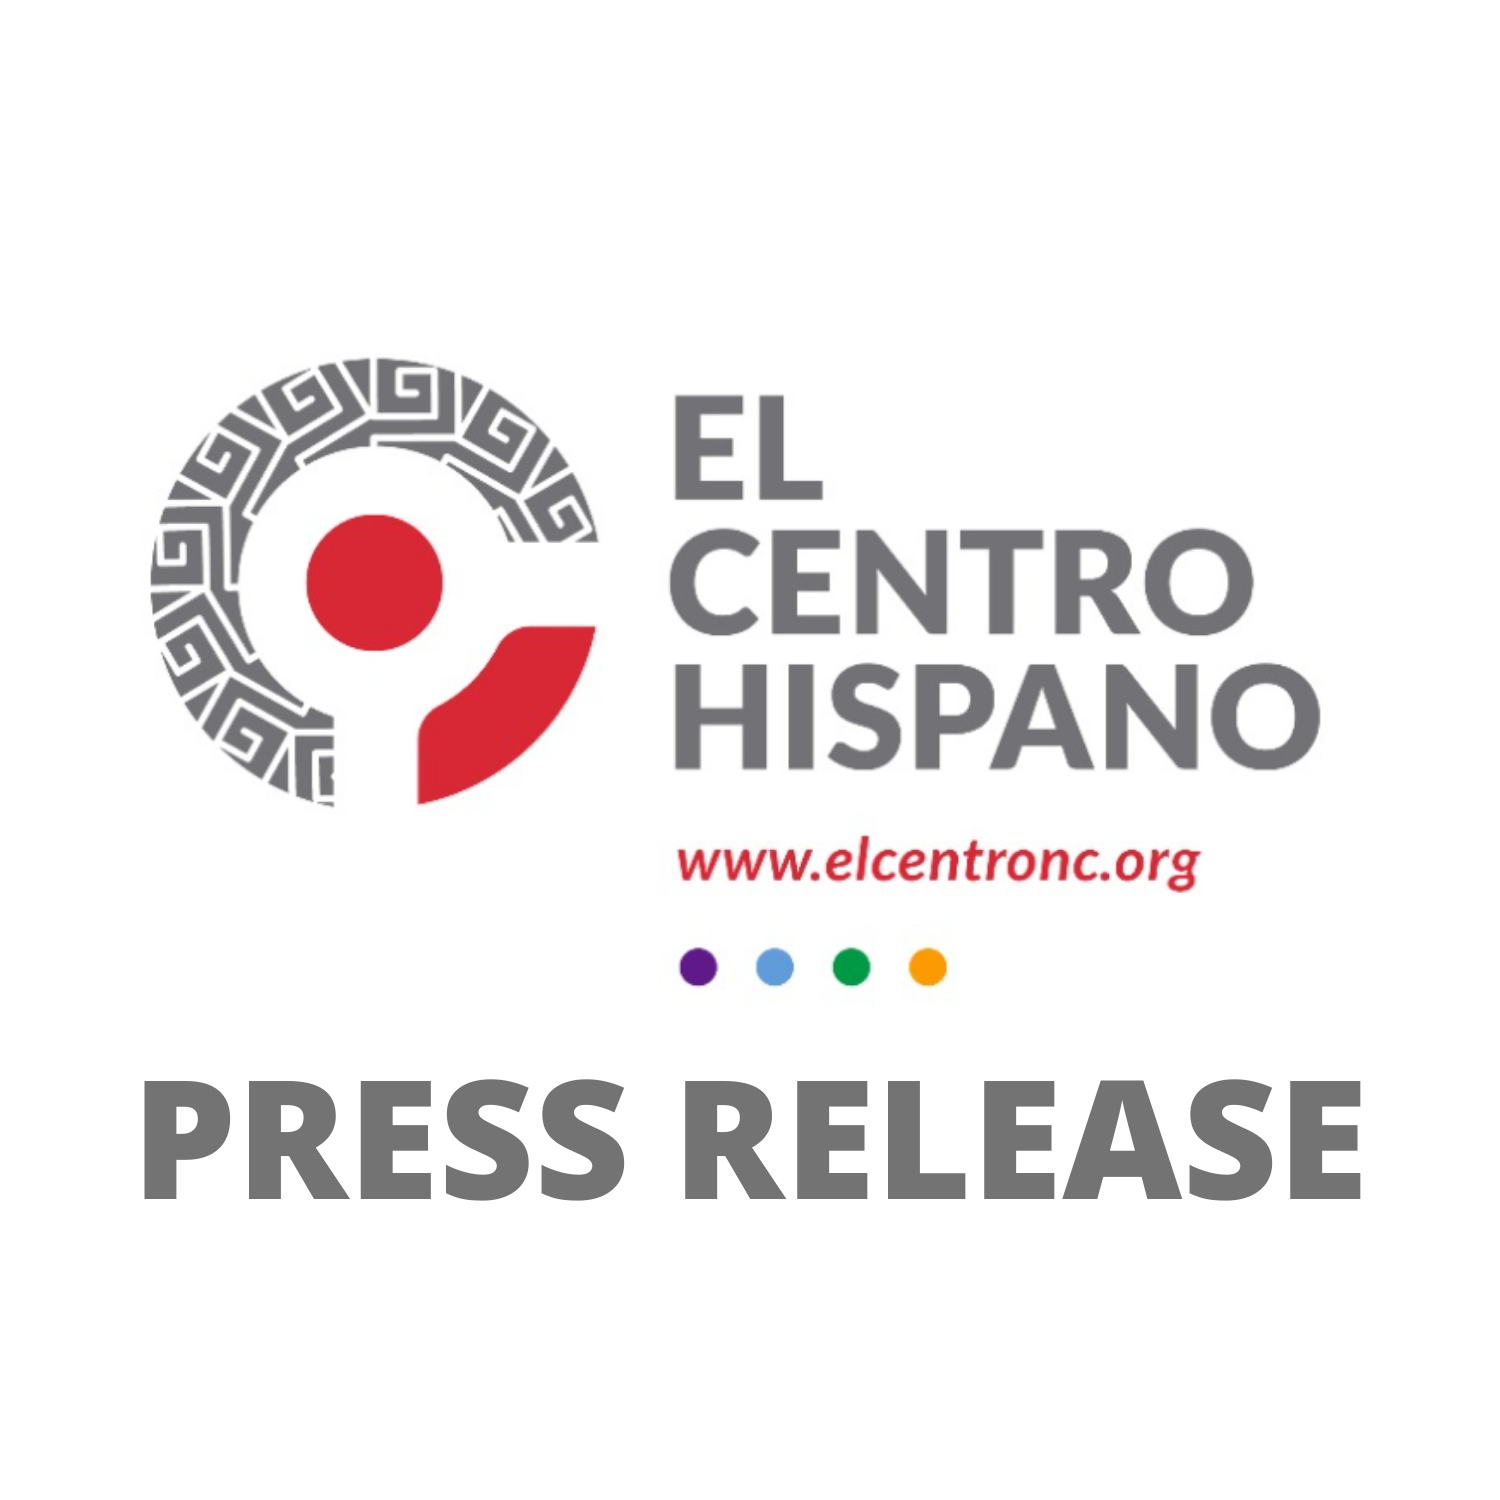 El Centro Hispano Continues to respond to the needs of the Latinx community